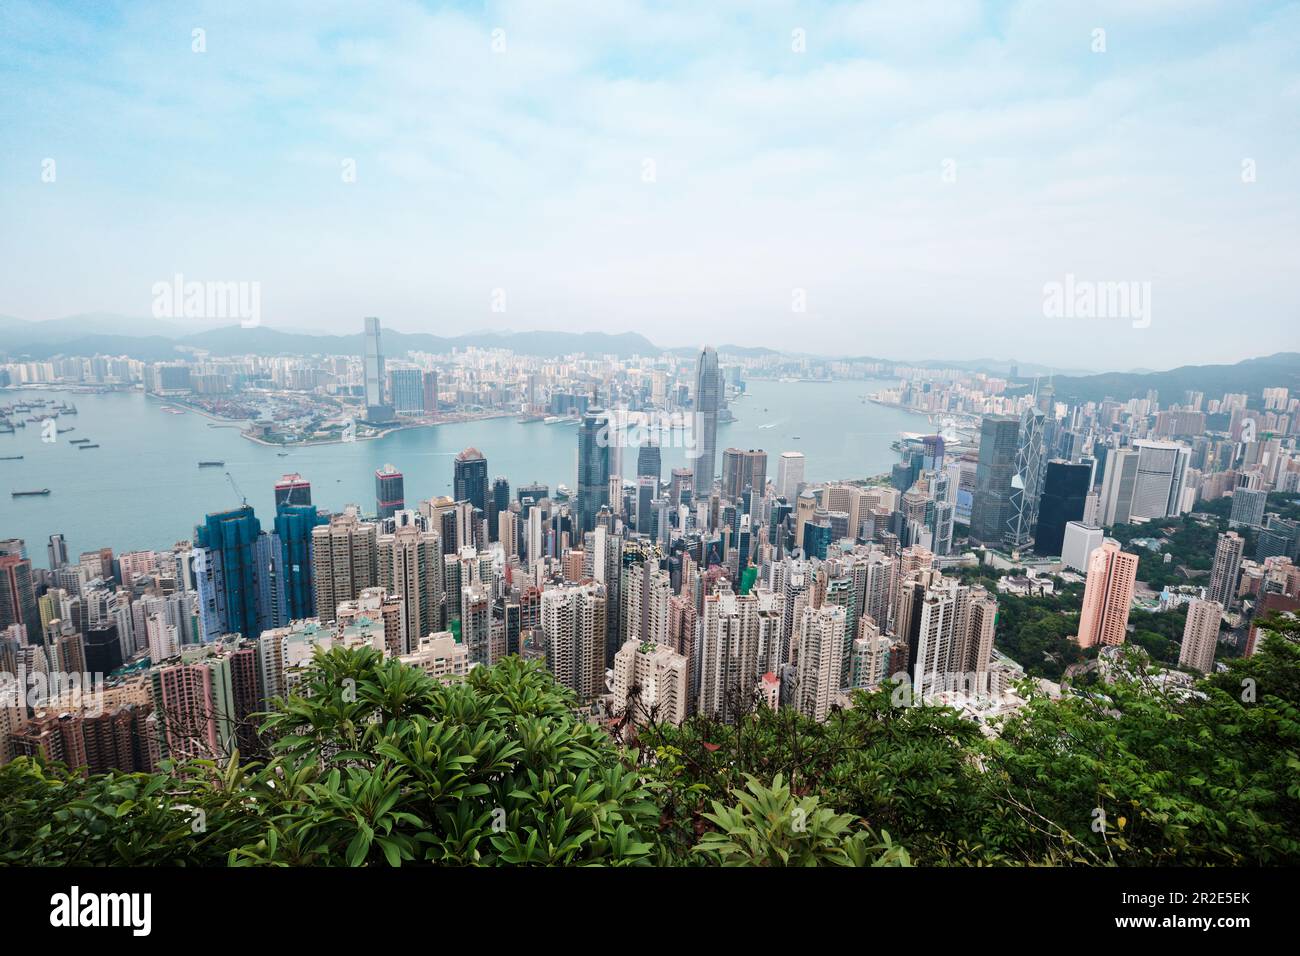 Hong Kong SAR, China - April 2023: Cityscape skyline seen from Lugard Road on Victoria Peak. Magneficent high rise architecure and settlement of HK Stock Photo